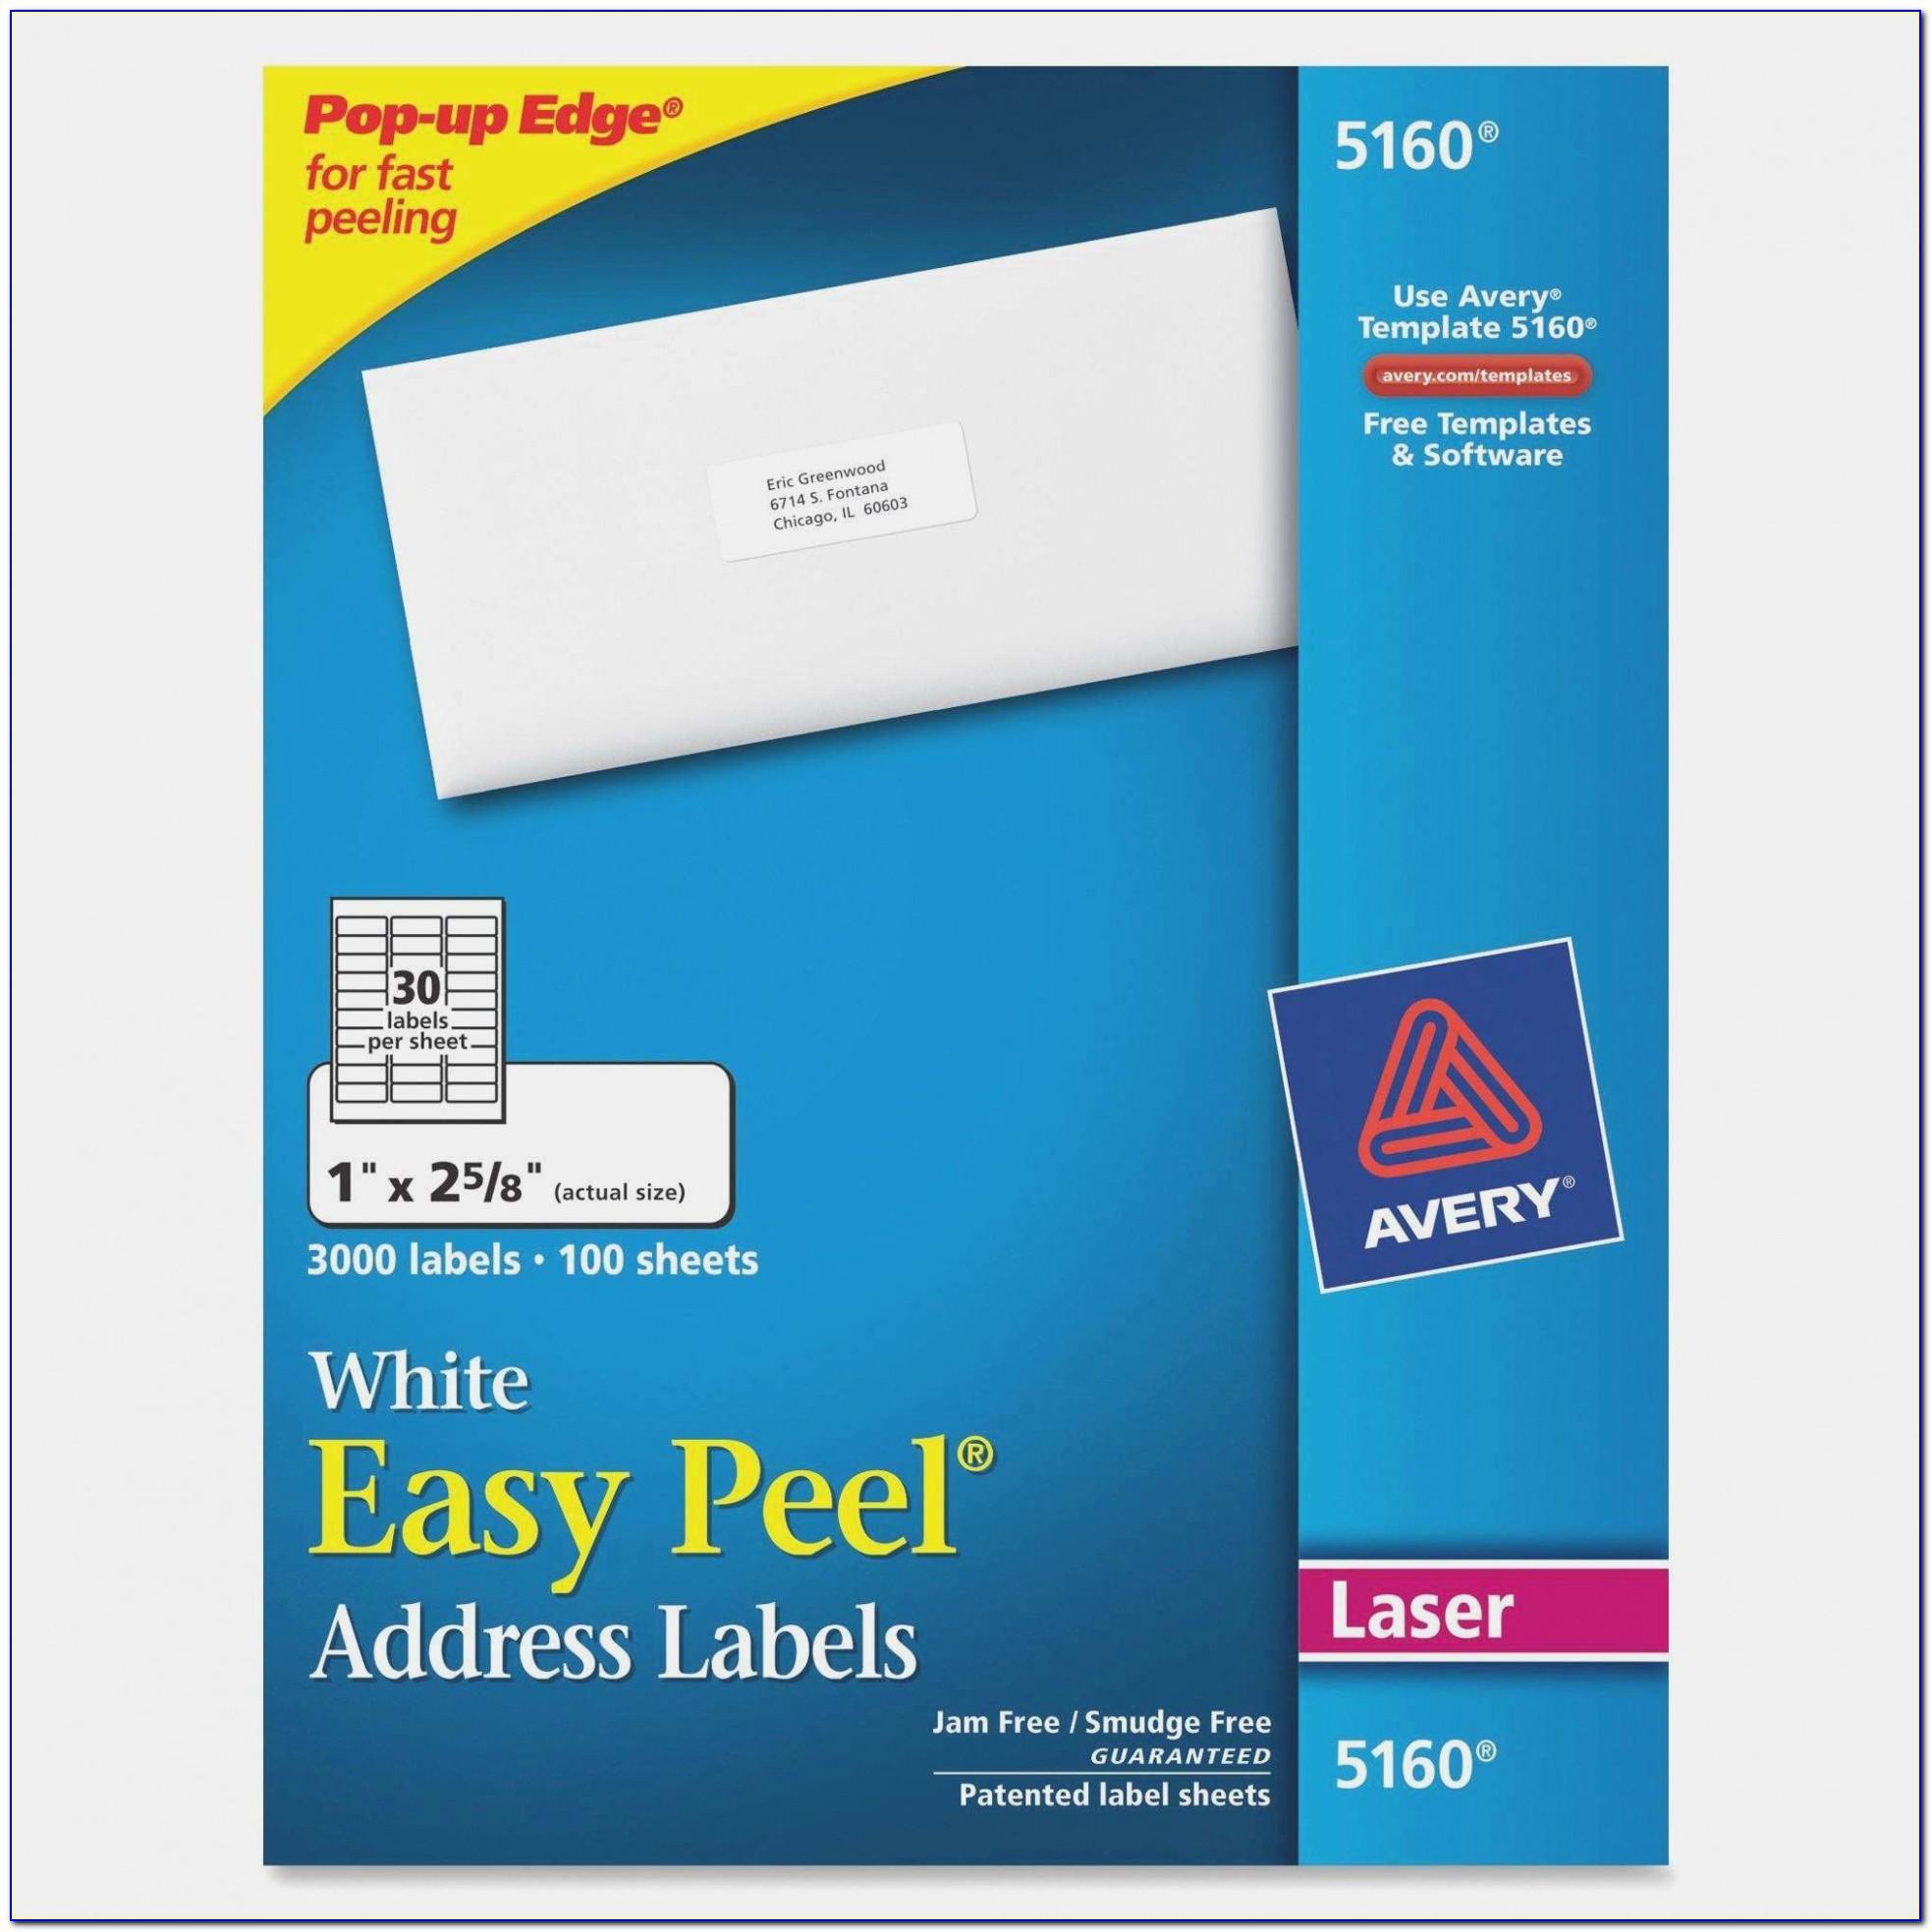 Staples Cd Label Sheet 2 Disc Labels Template